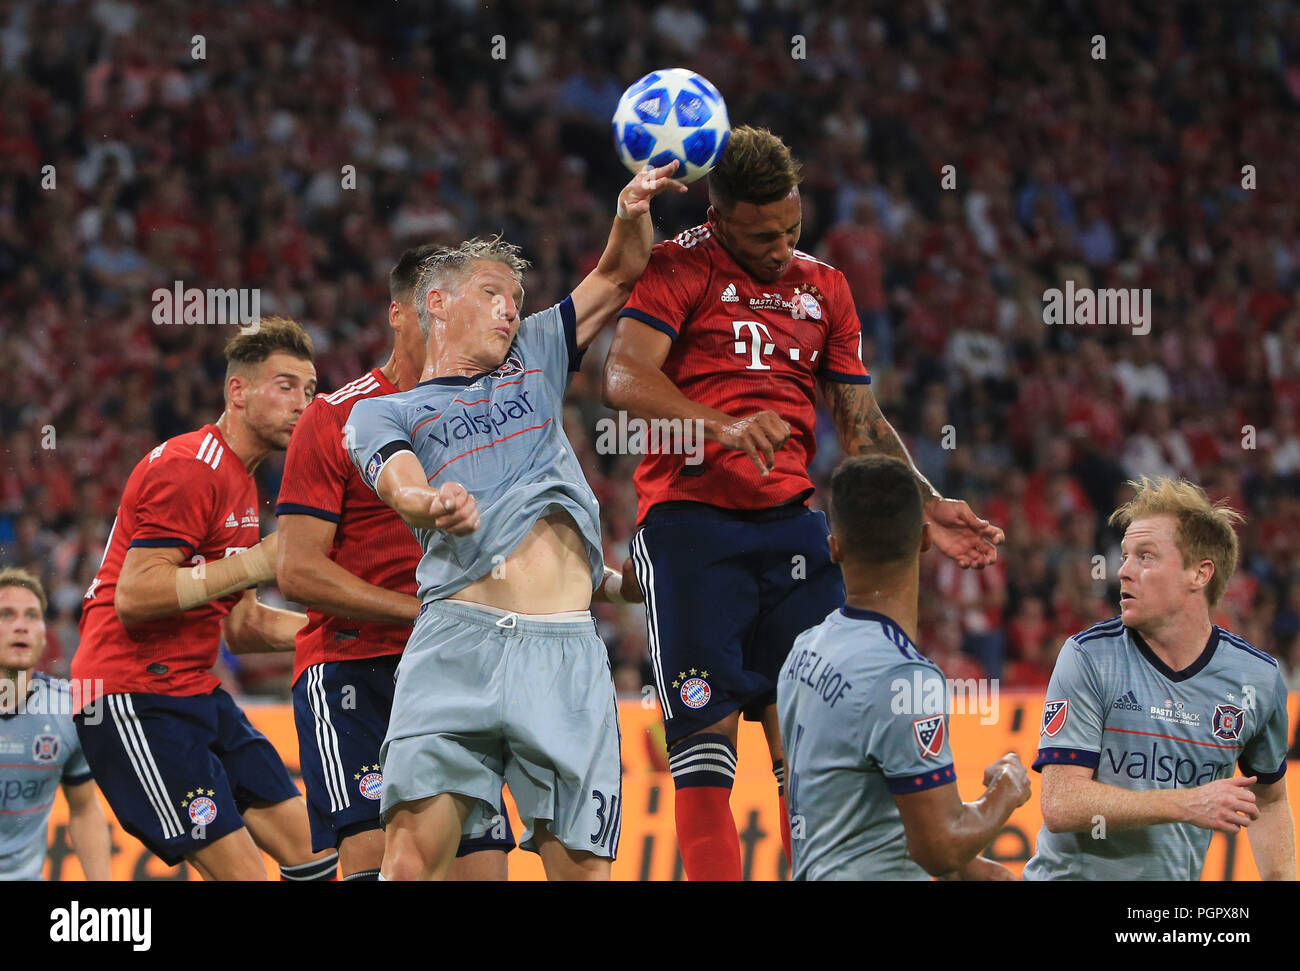 Munich, Germany. 28th Aug, 2018. German player Bastian Schweinsteiger (up L) vies with Bayern Munich's Corentin Tolisso (up R) during his farewell match between Bayern Munich of Germany and Chicago Fire of the United States, in Munich, Germany, on Aug. 28, 2018. A farewell match for German soccer player Bastian Schweinsteiger was held in Munich on Tuesday between Bayern Munich and Chicago Fire. He used to play for Bayern Munich from 1998 to 2015 and has been a member of Chicago Fire since 2017. Bayern Munich won 4-0. Credit: Philippe Ruiz/Xinhua/Alamy Live News Stock Photo